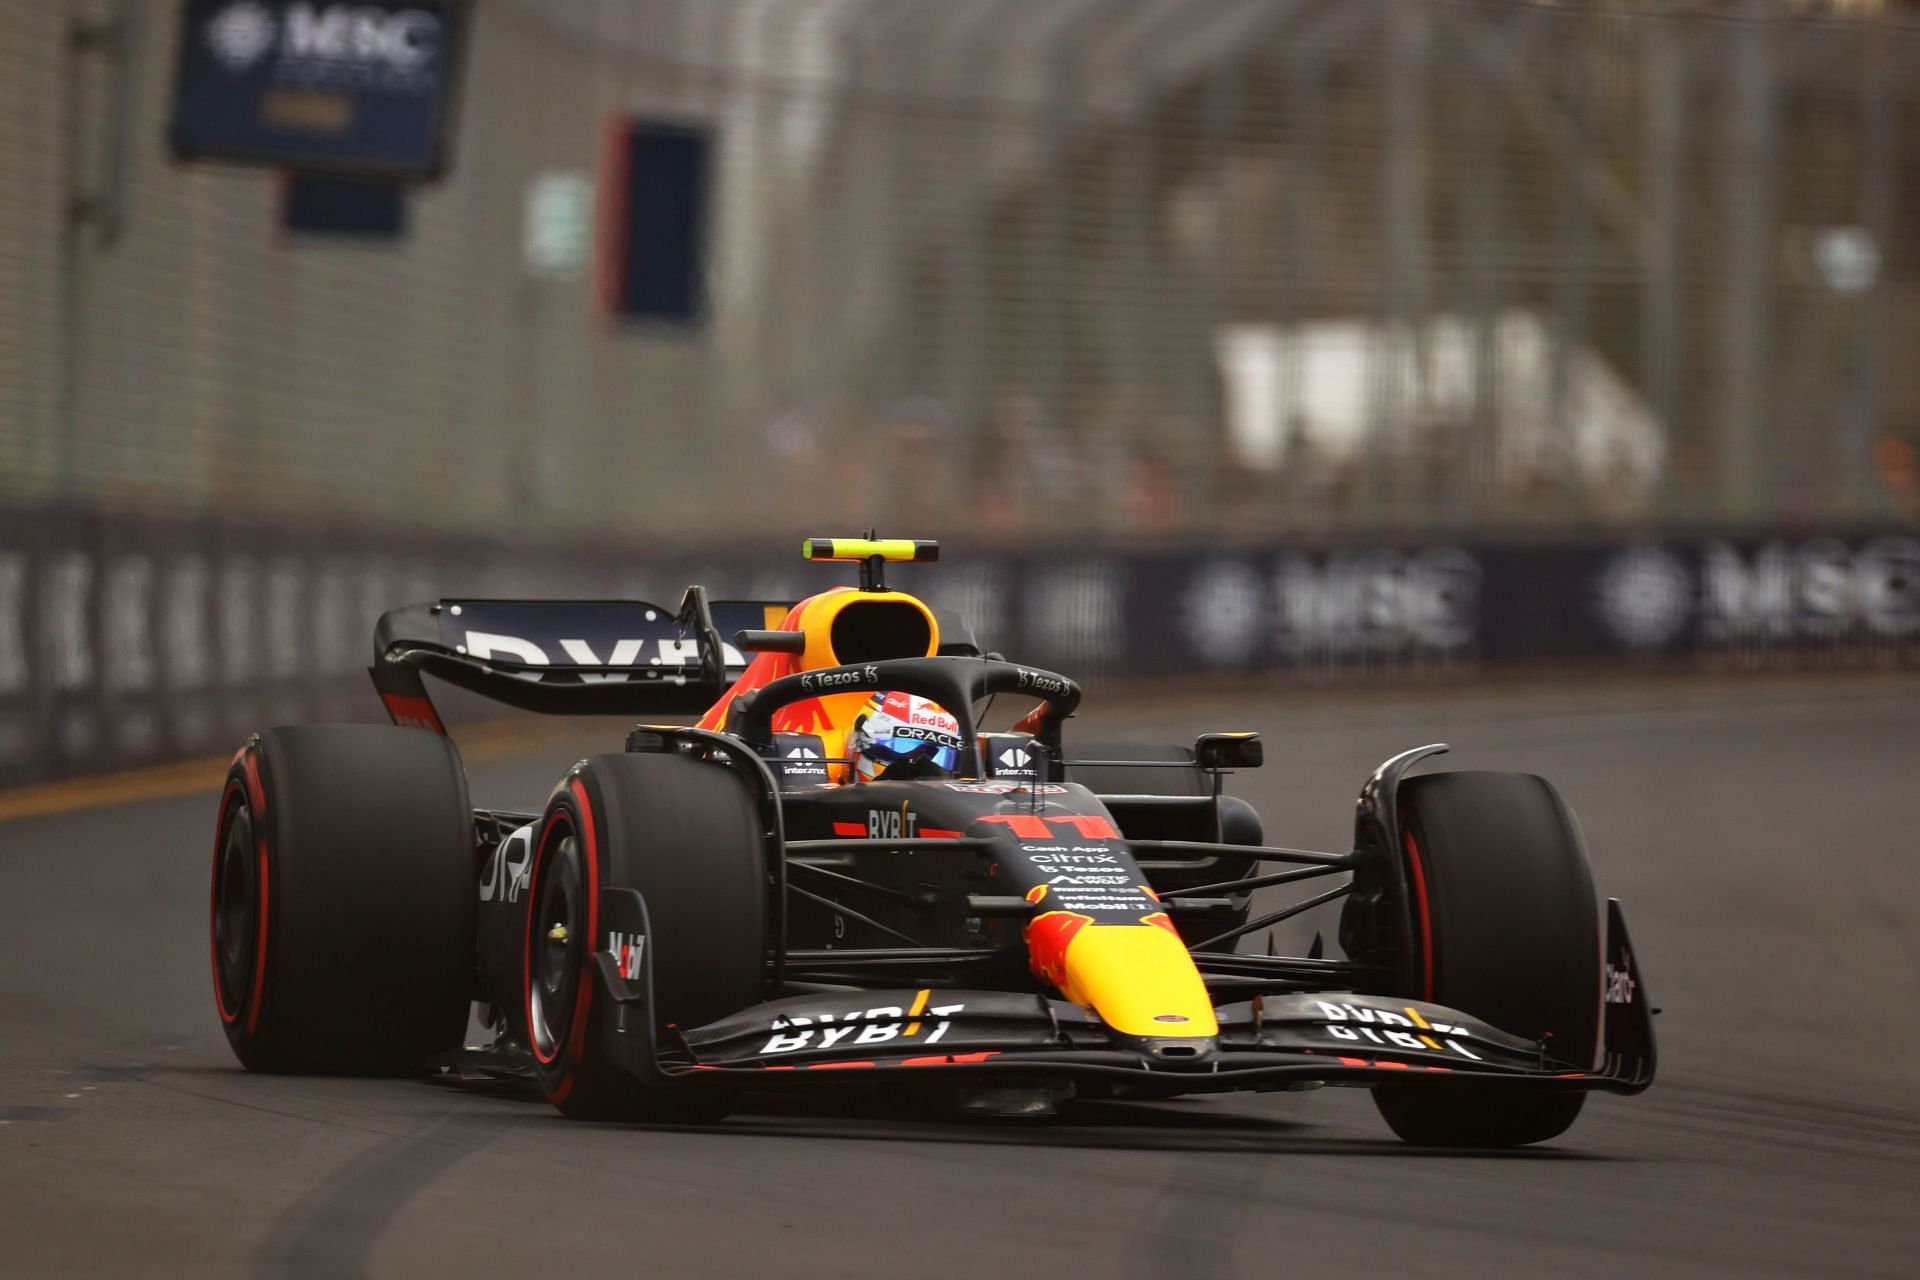 Sergio Perez en route to claiming P3 during qualifying at the 2022 F1 Australian GP (Photo by Robert Cianflone/Getty Images)